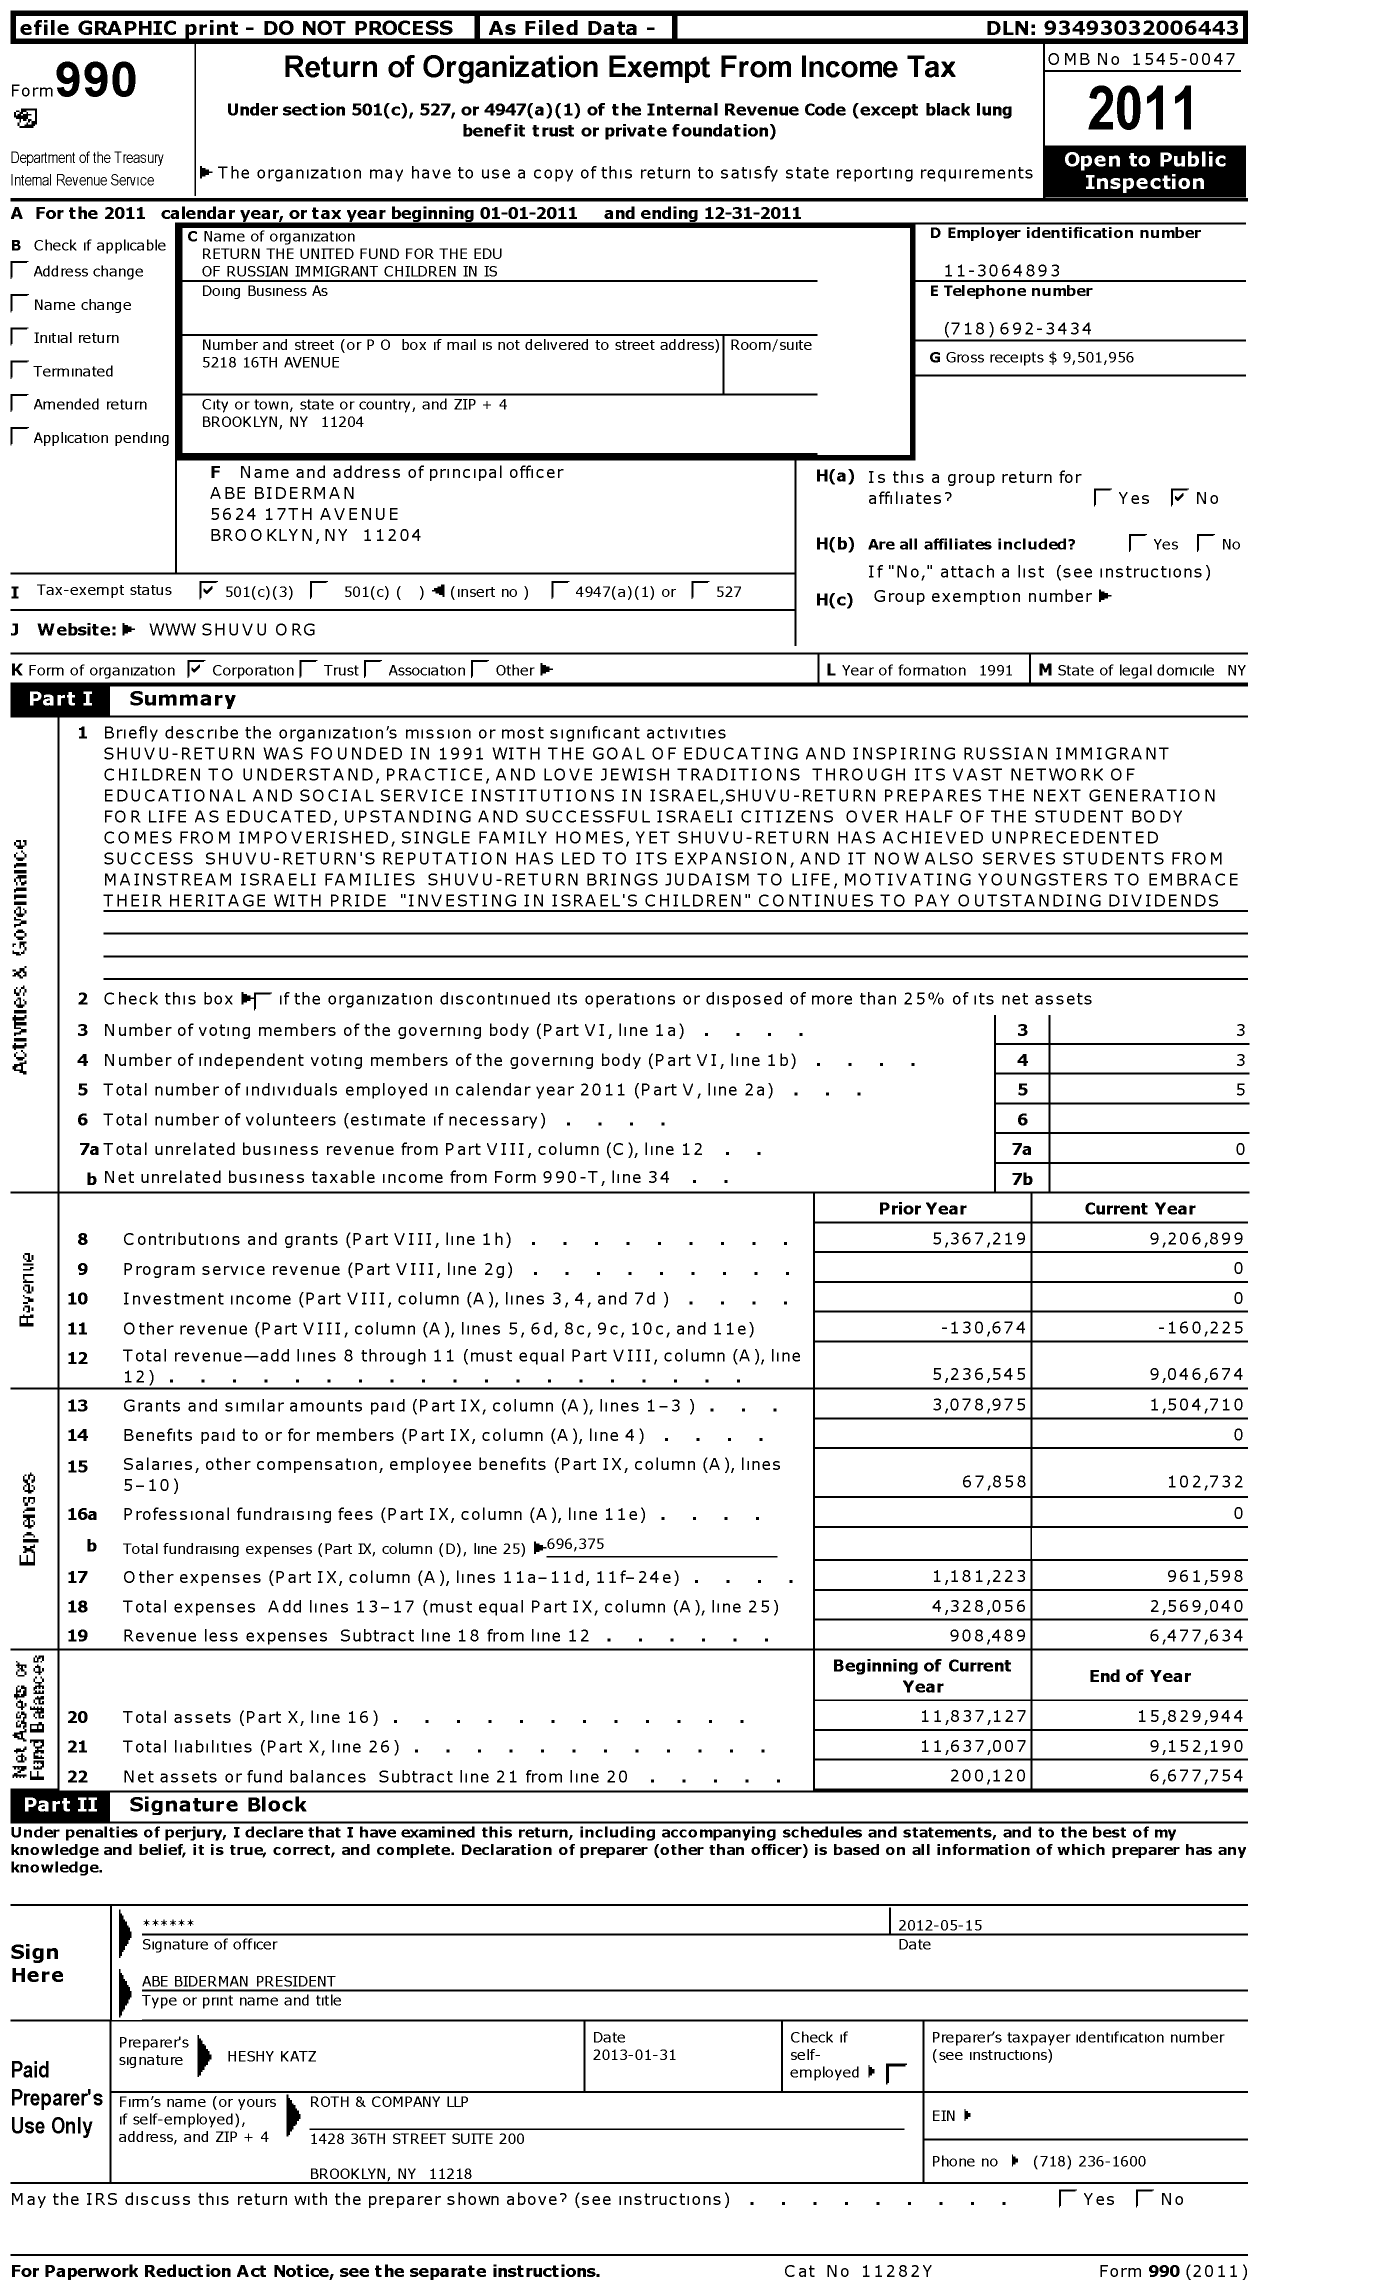 Image of first page of 2011 Form 990 for Return the United Fund for the Edu of Russian Immigrant Children in Is